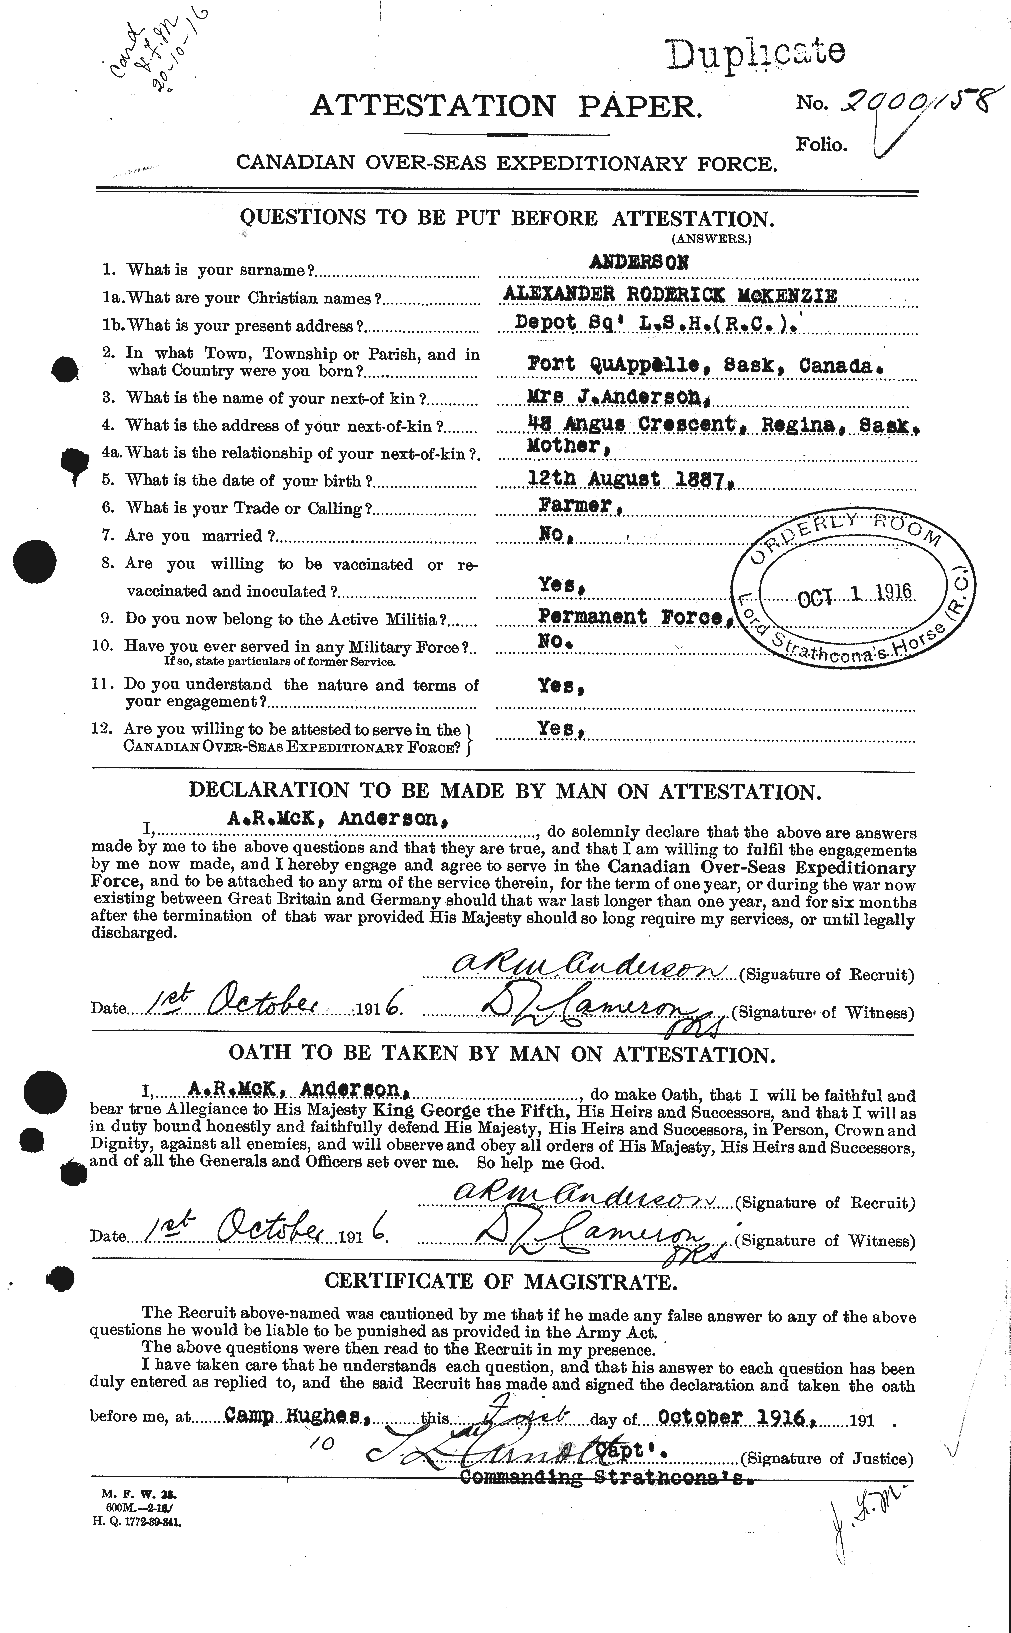 Personnel Records of the First World War - CEF 209476a